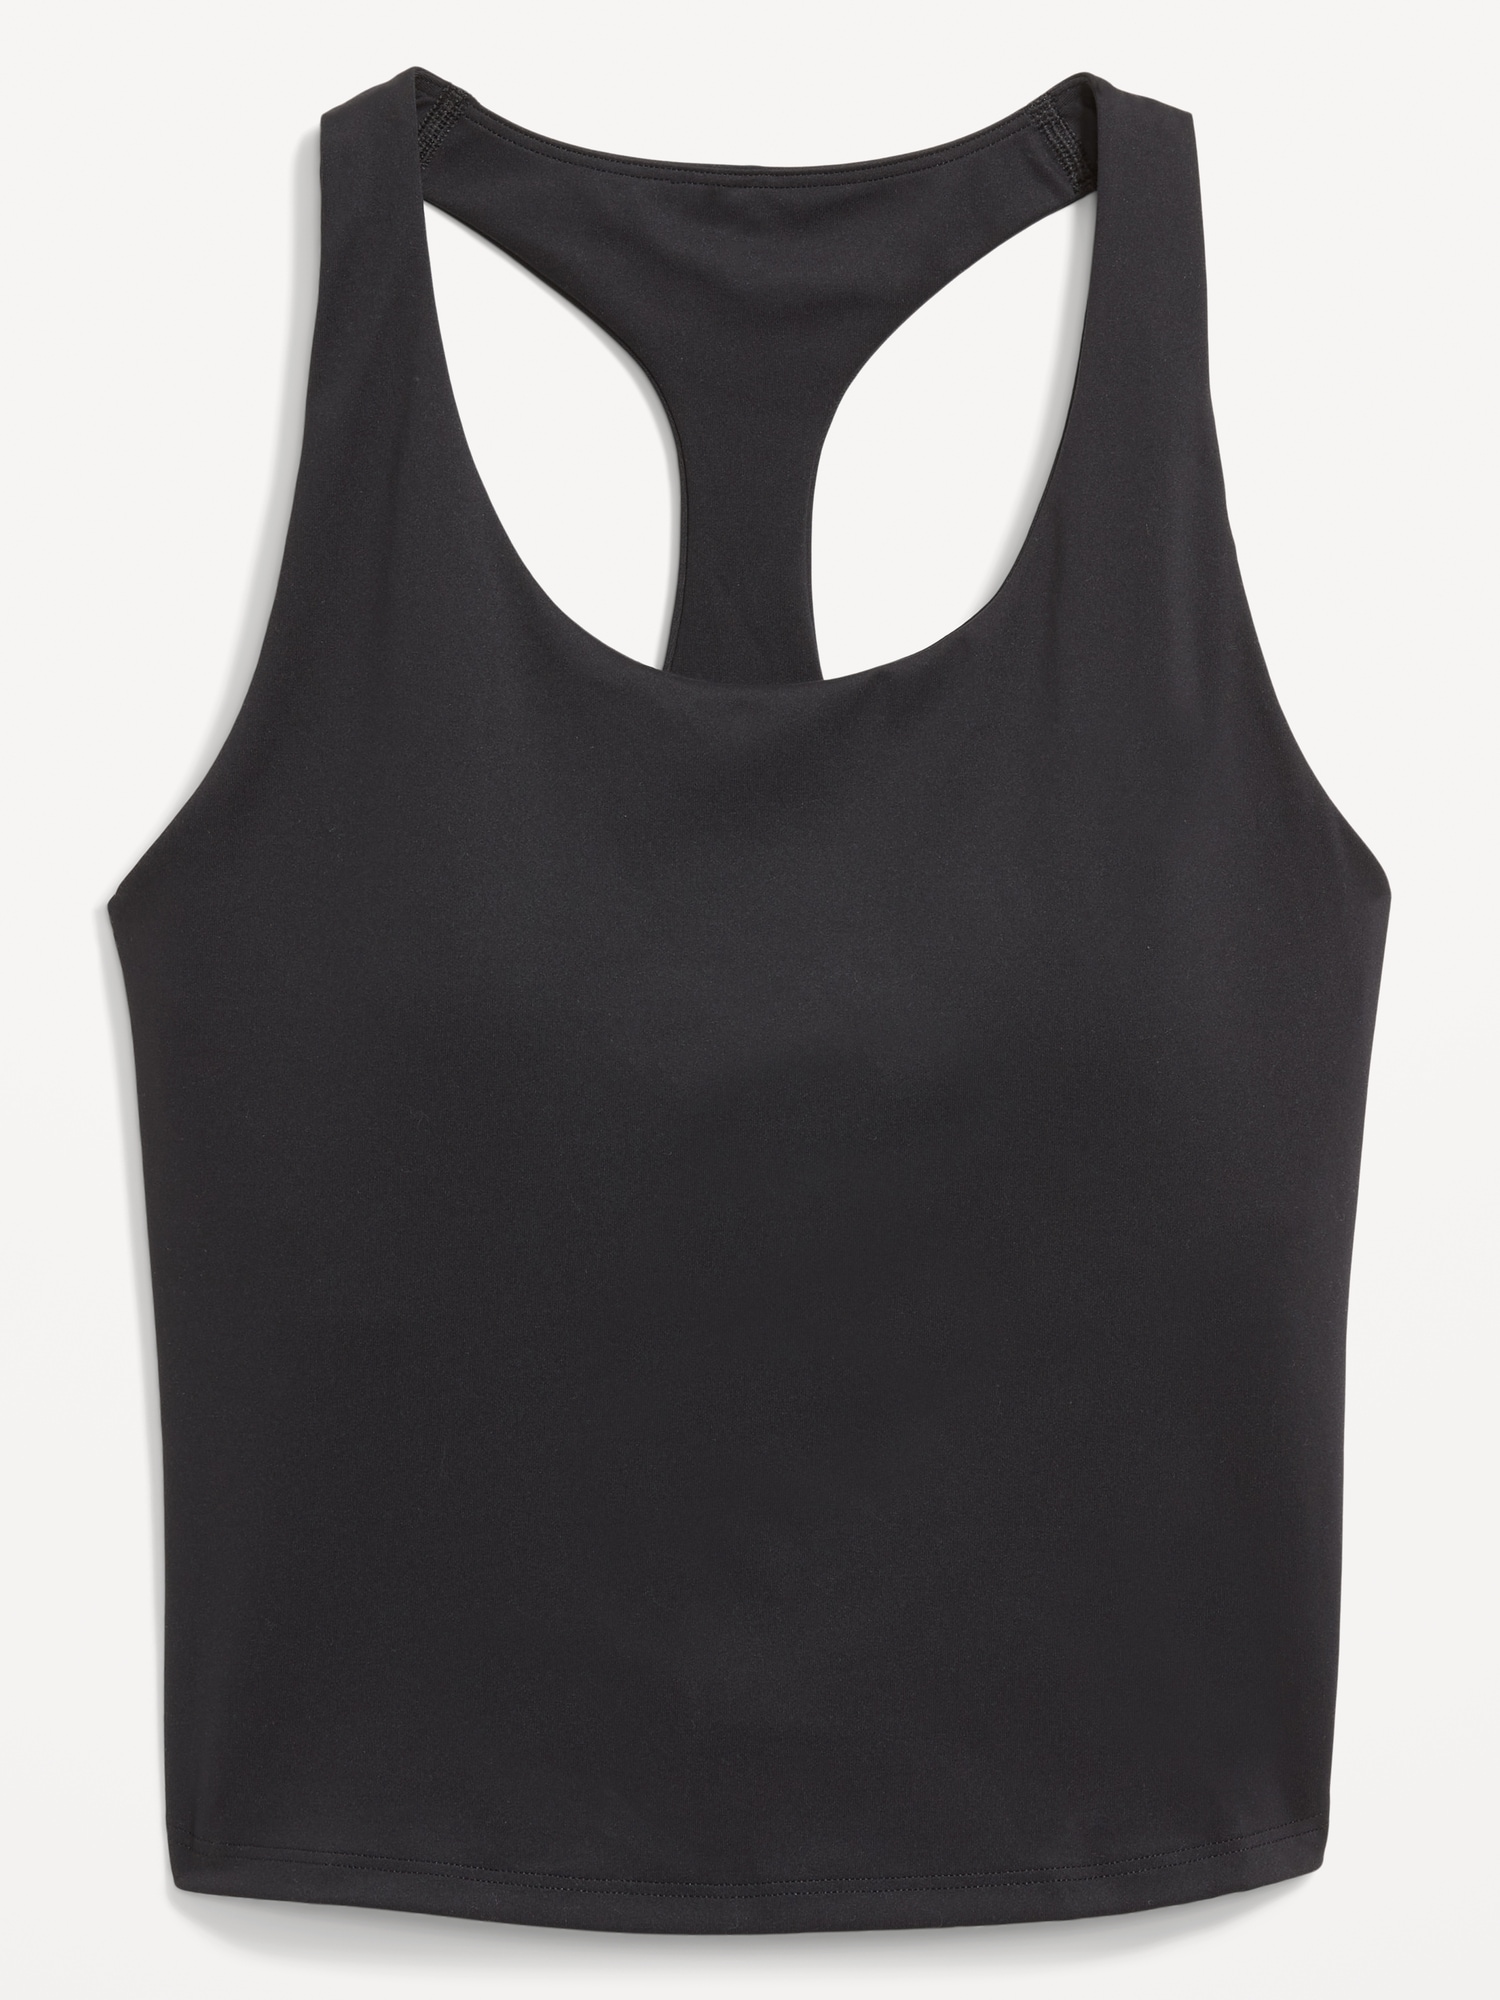 PowerSoft Cropped Racerback Tank Top for Women | Old Navy